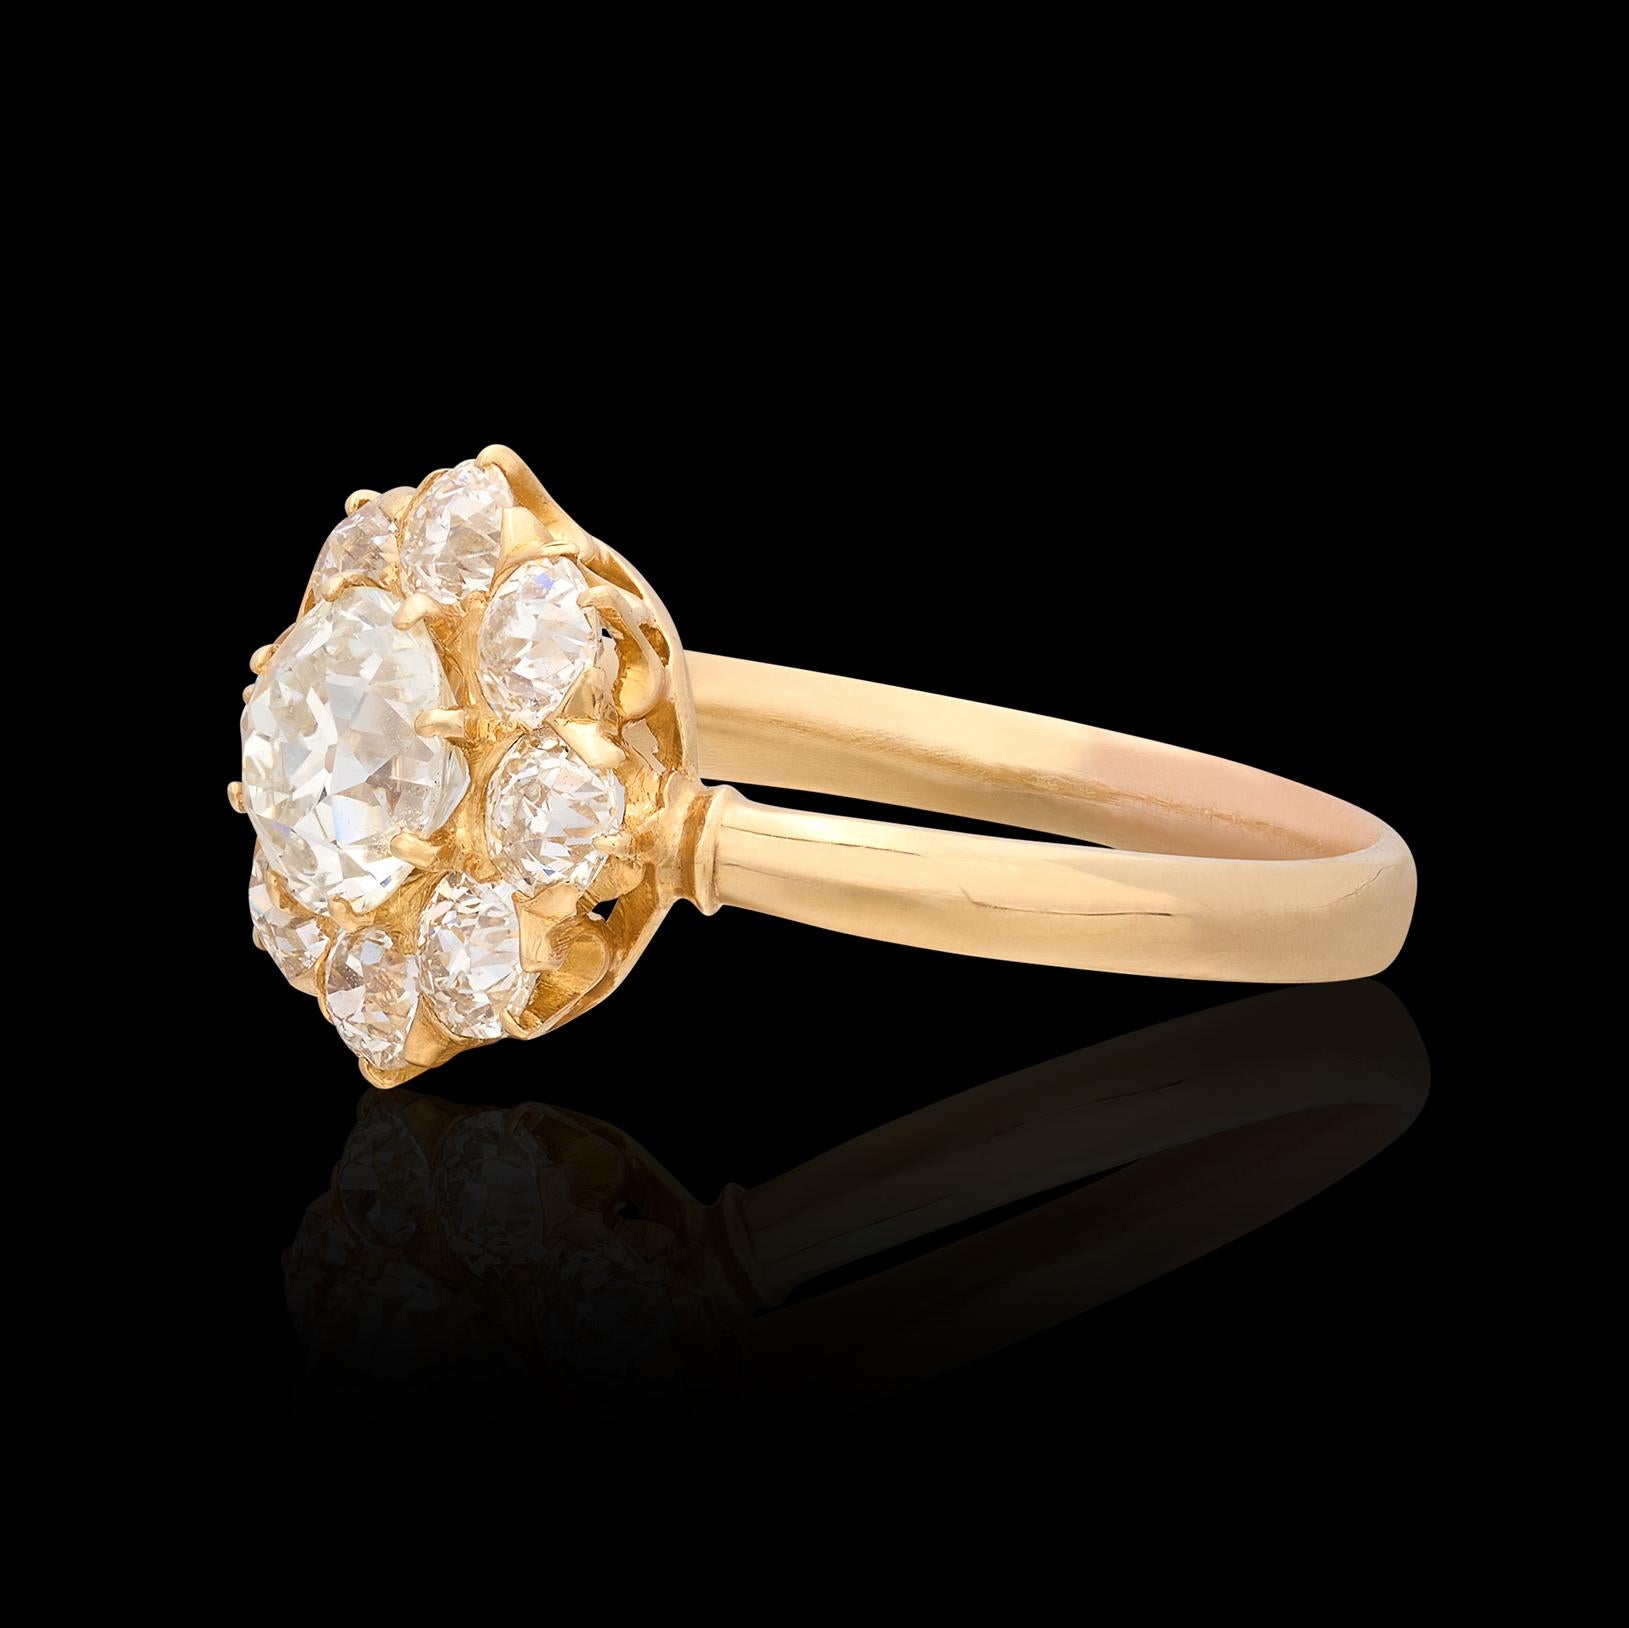 18k Gold Antique Old European Cut Diamond Ring For Sale 3